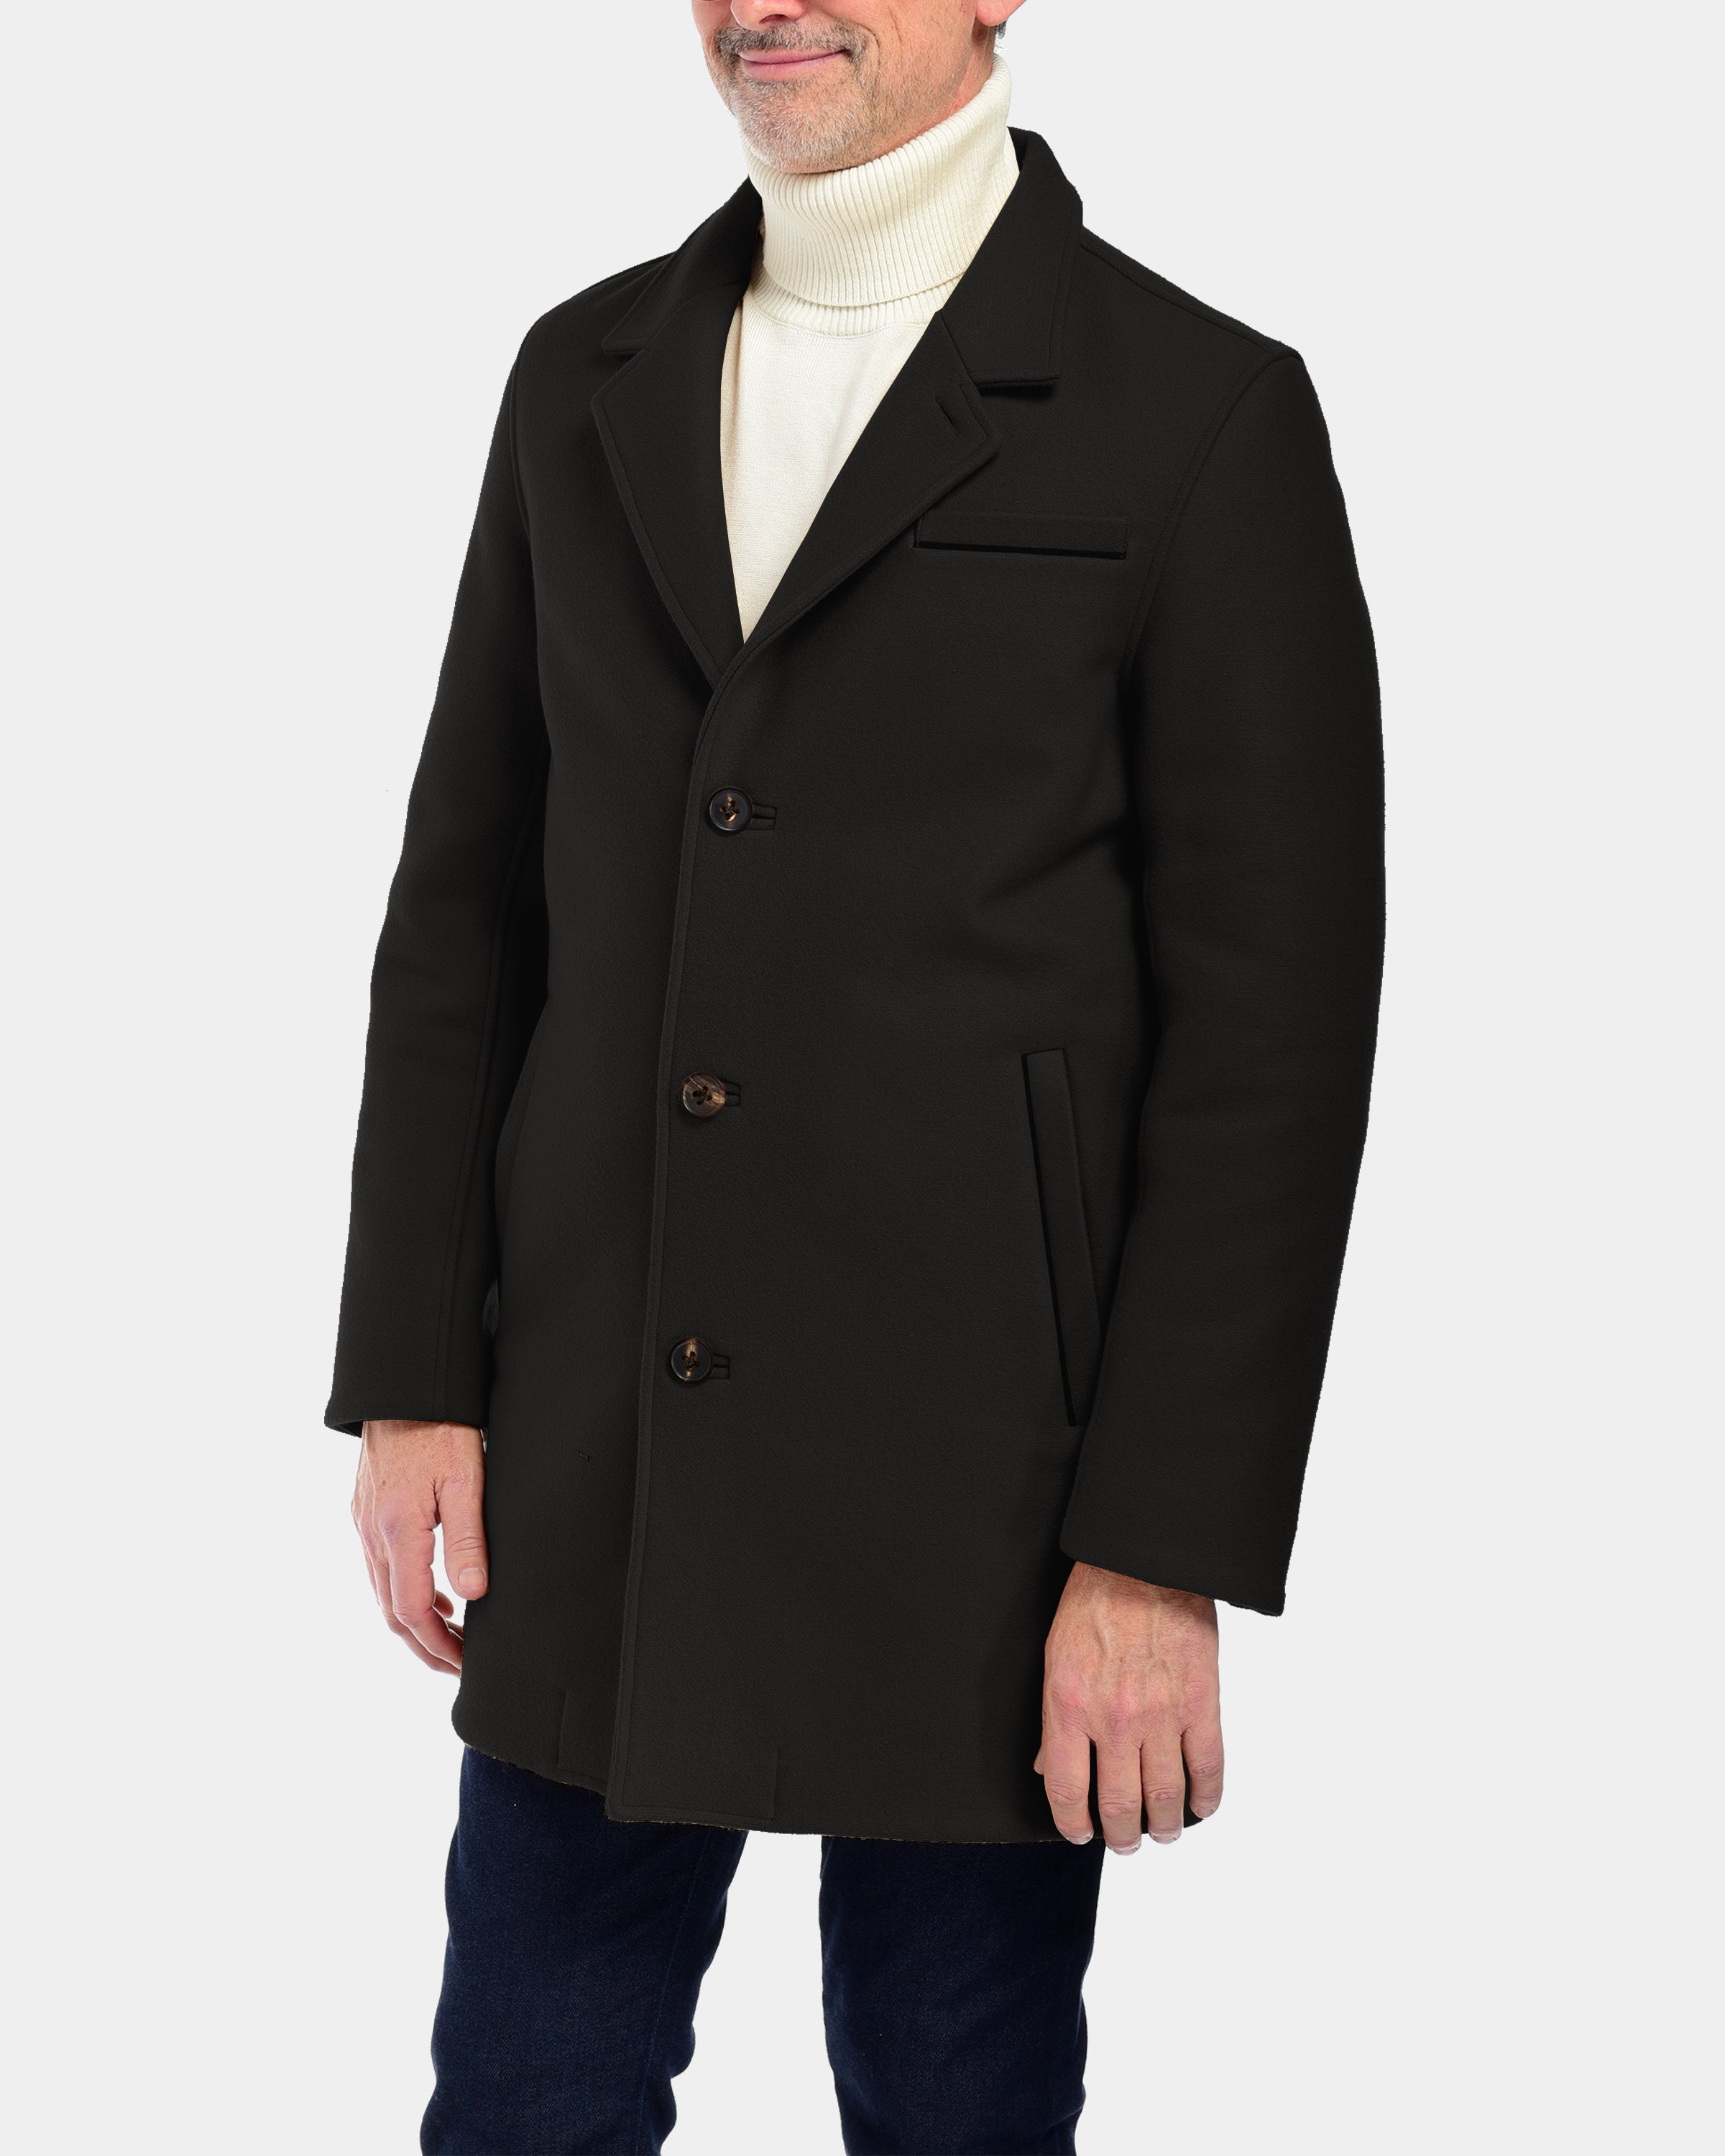 Fisher + Baker Hudson Topcoat Large Black Is Made from Wool and Nylon Blend